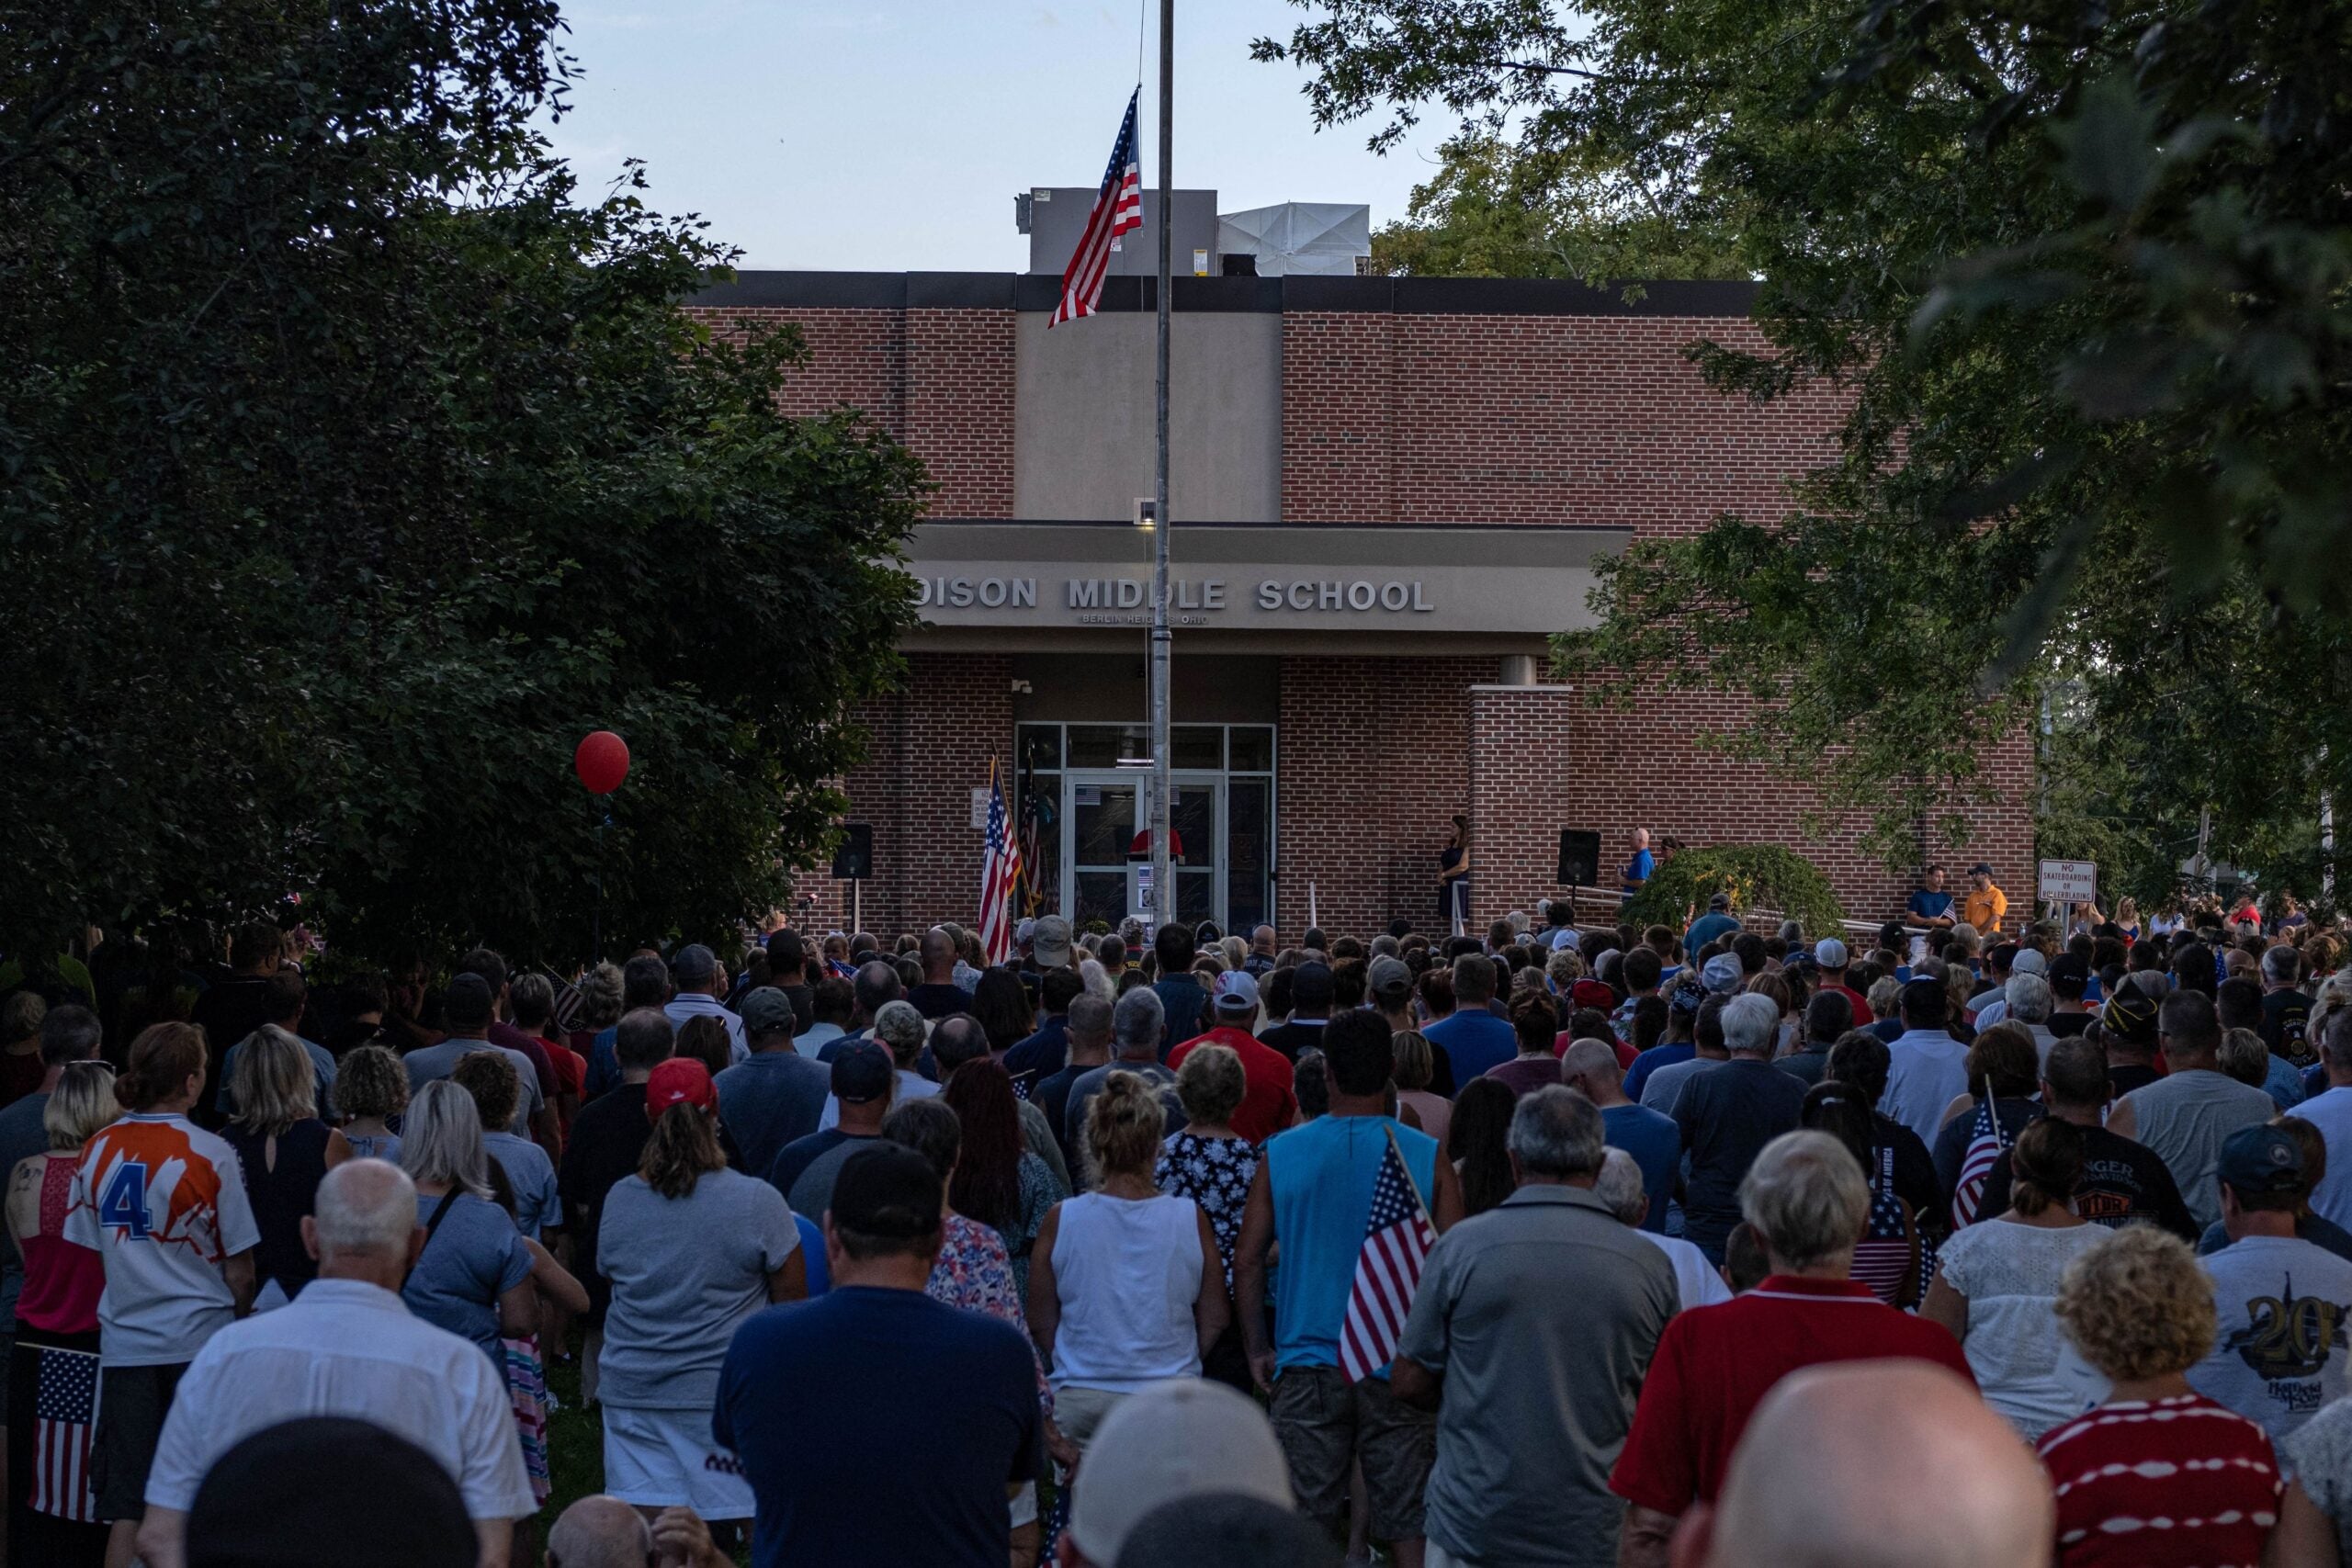 People attend a vigil for Navy Corpsman Maxton "Max" W. Soviak at Edison Middle School in Berlin Heights, Ohio on August 29, 2021. - Soviak was killed during the August 26 terror attack outside of Kabul Airport in Afghanistan along with 12 other American service members and more than 100 Afghans. (Photo by SETH HERALD / AFP) (Photo by SETH HERALD/AFP via Getty Images)